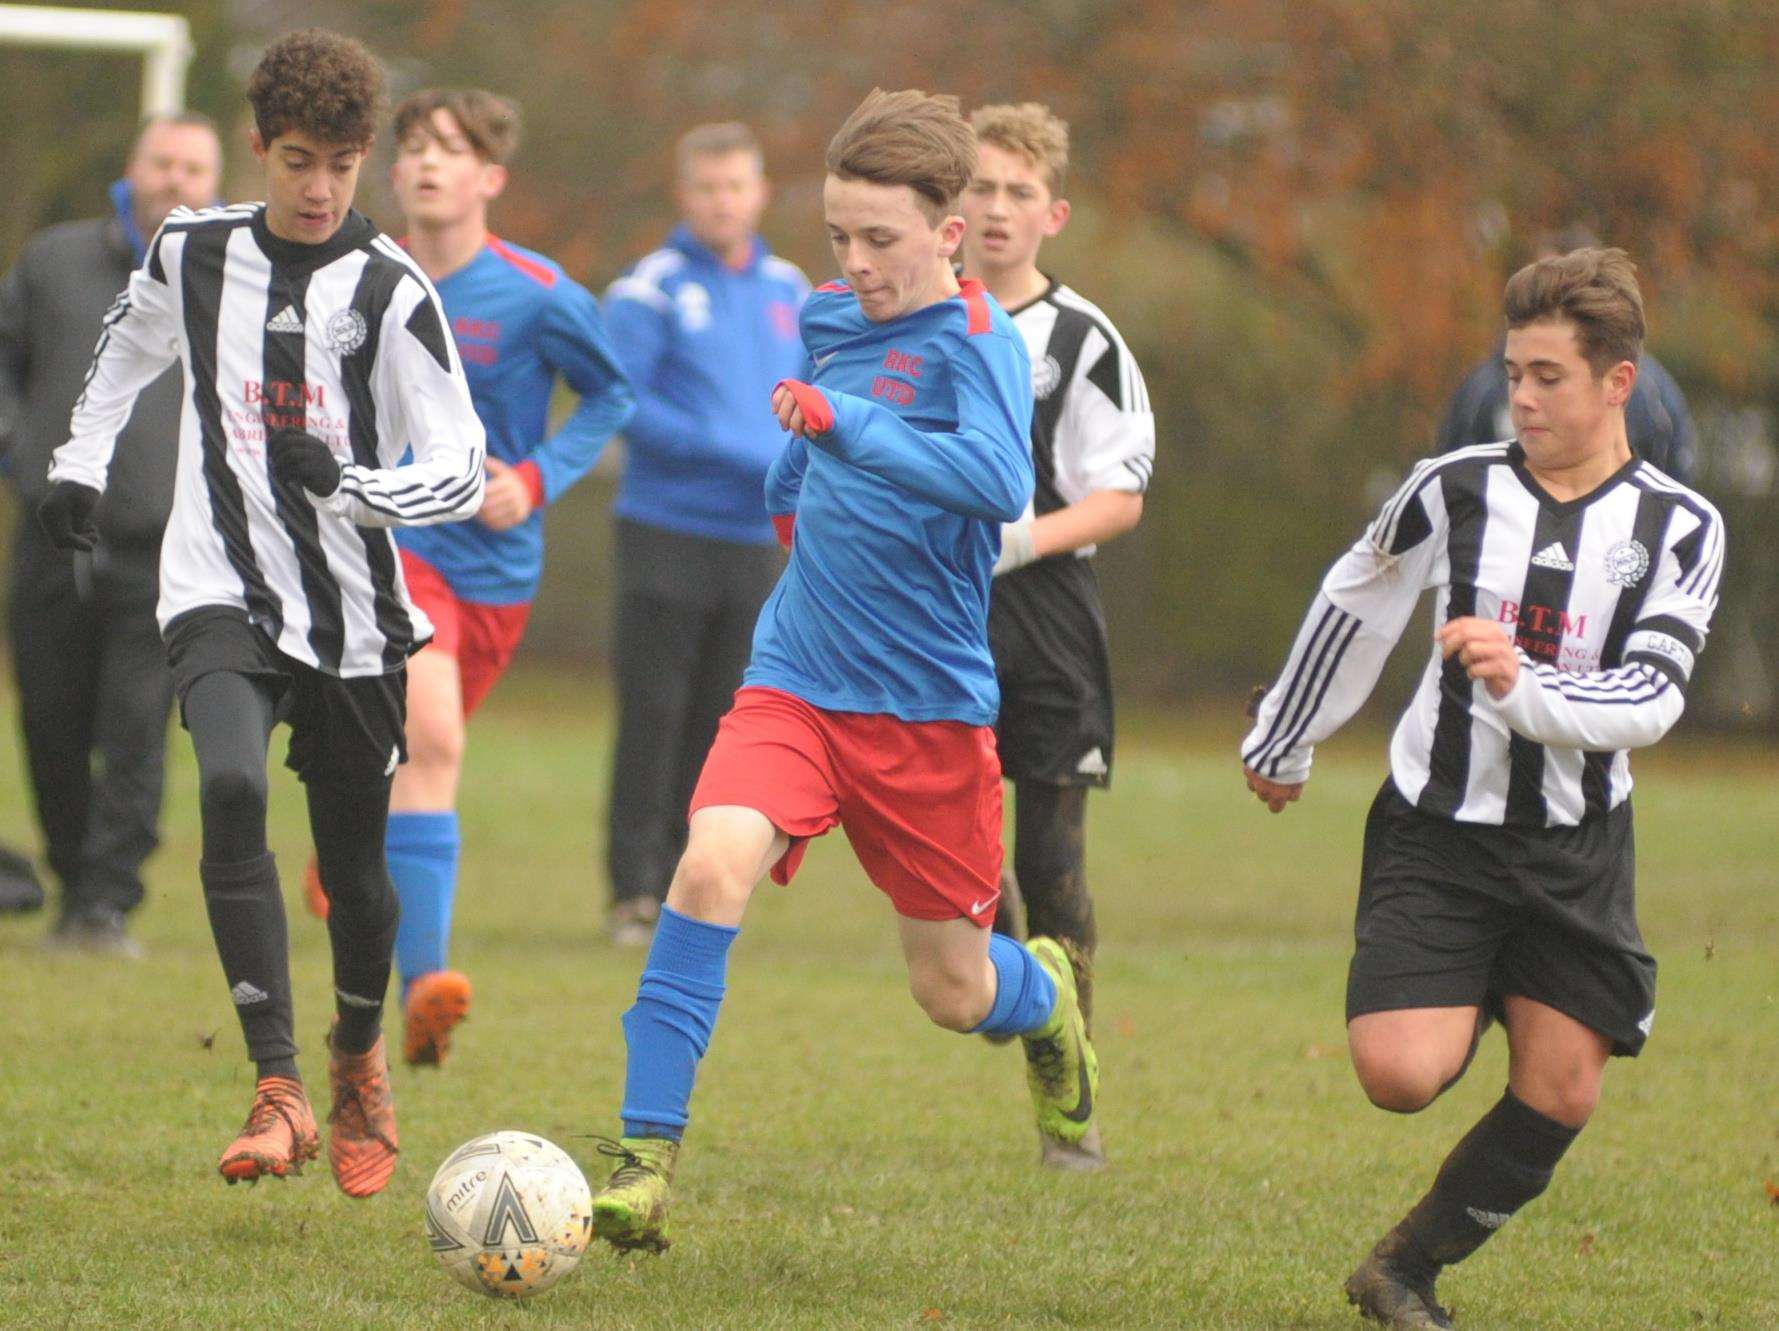 The chase is on for Rainham Kenilworth under-15s against Real 60 Panthers Picture: Steve Crispe